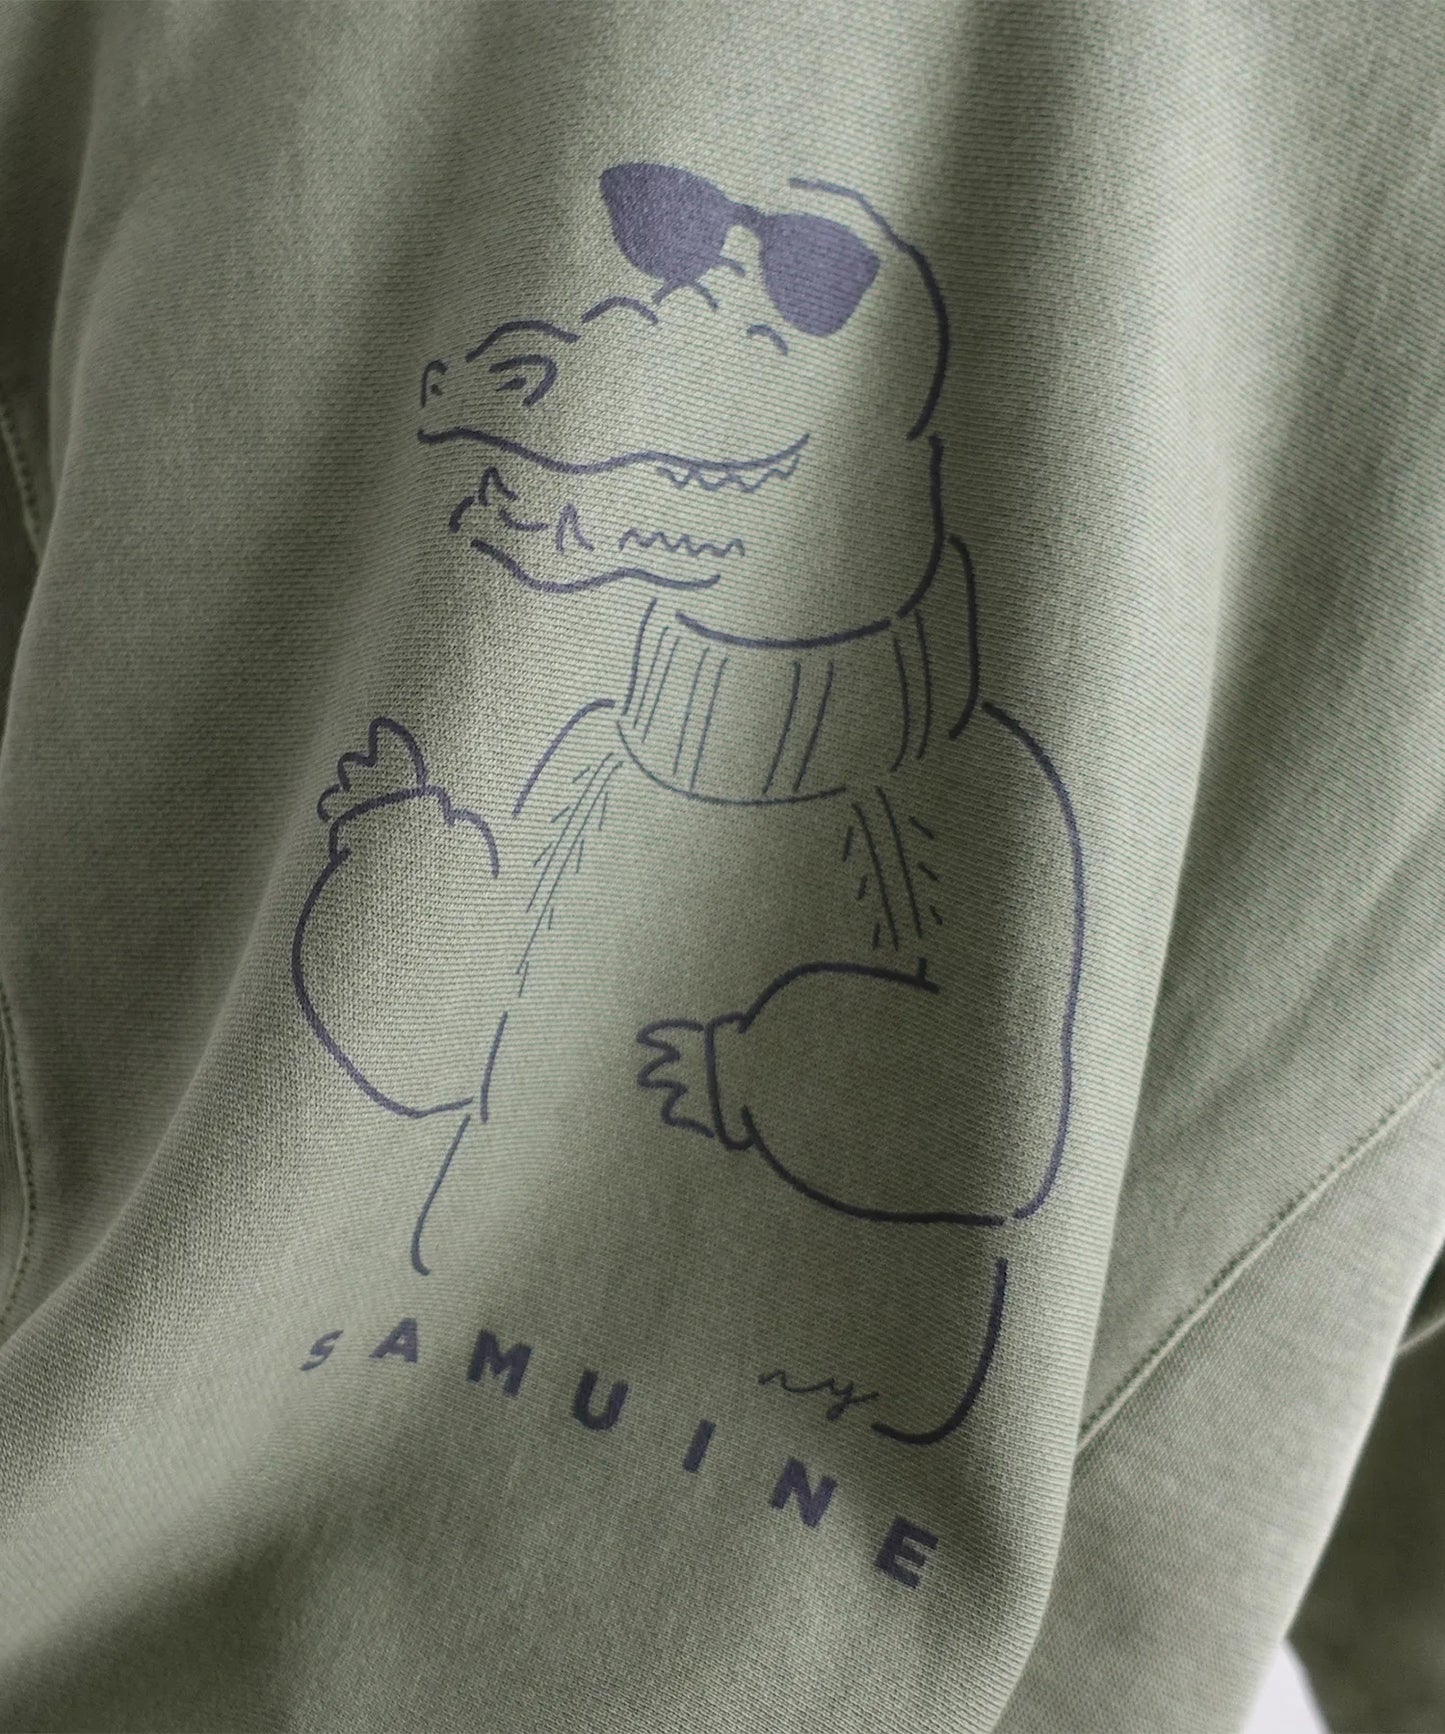 [Environmentally friendly material] OG CANVAS TERRY LOOP CROCODILE PO Organic cotton fleece product dyed [100-145cm]